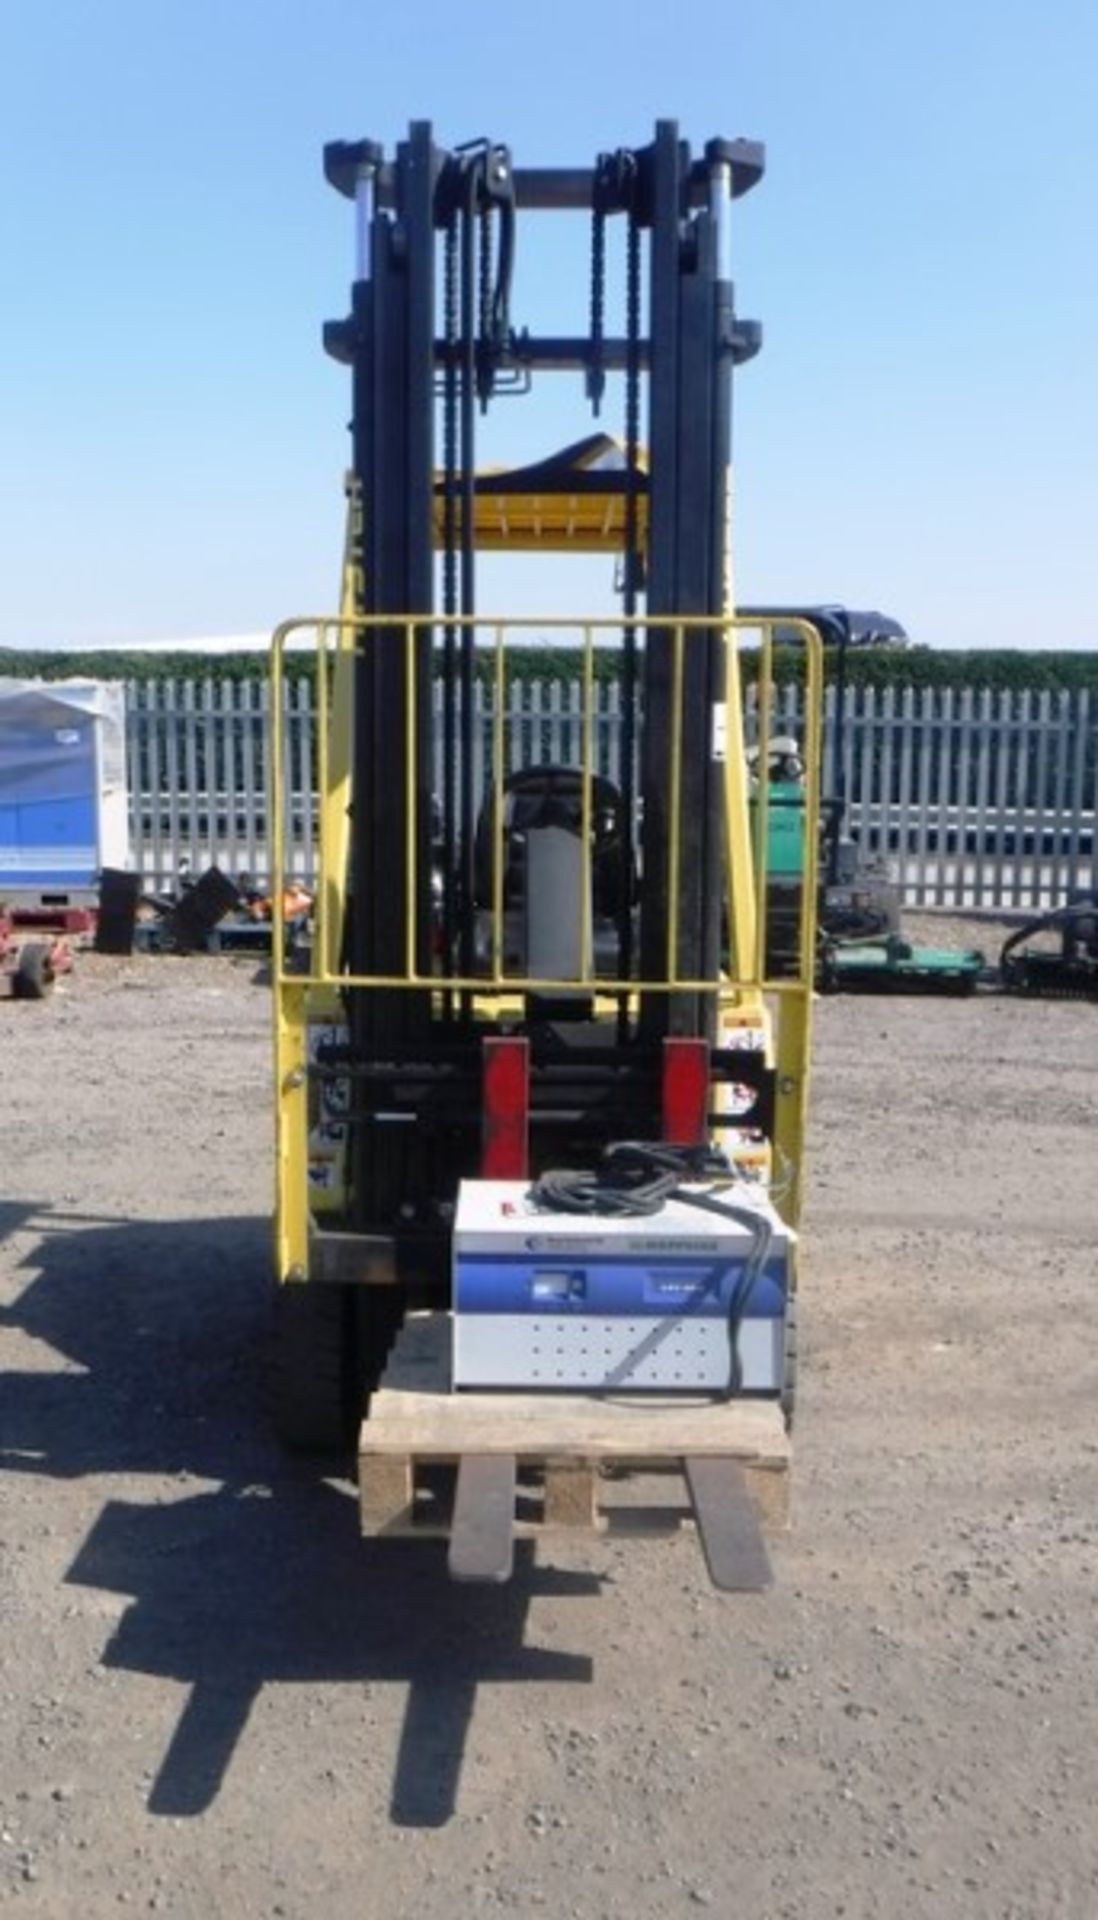 2011 HYSTER forklift A 1.50XL, s/n - C203B01762J, Max Reach - 3800mm, 402hrs (not verified) - Image 8 of 13